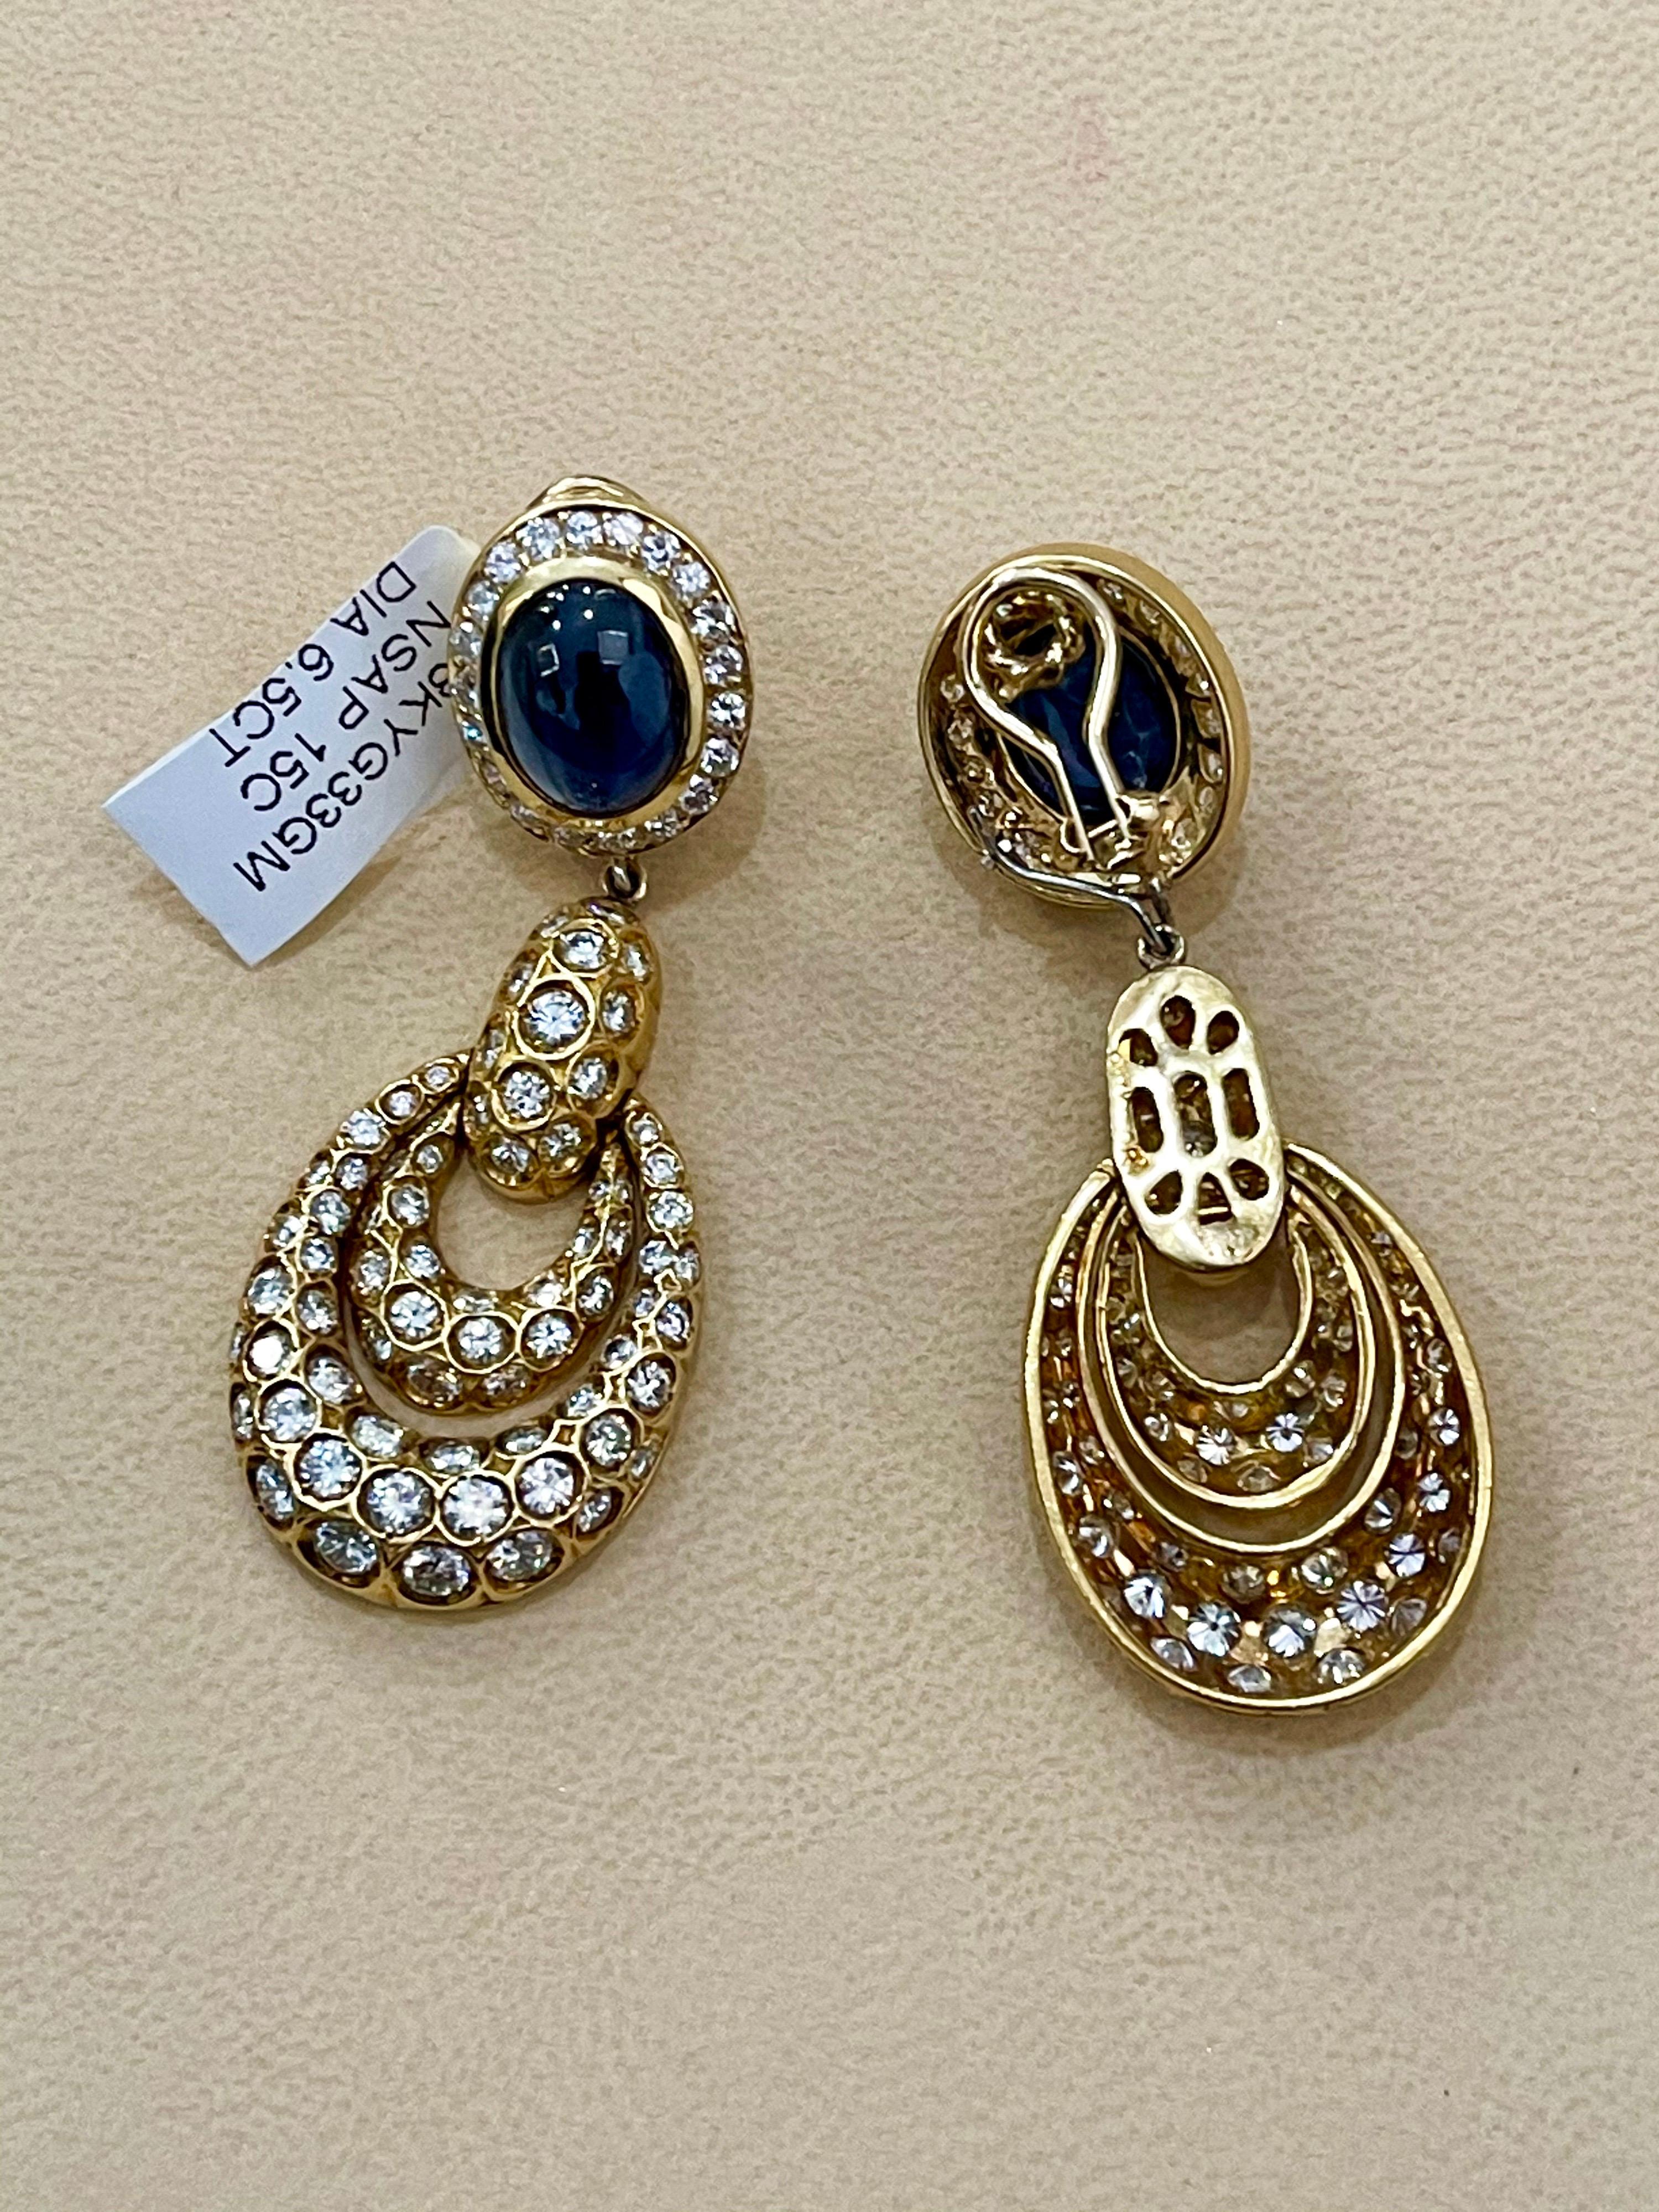 15 Carat Blue Sapphire and Diamond Hanging /Cocktail/Drop Earring 18 Karat Gold For Sale 10